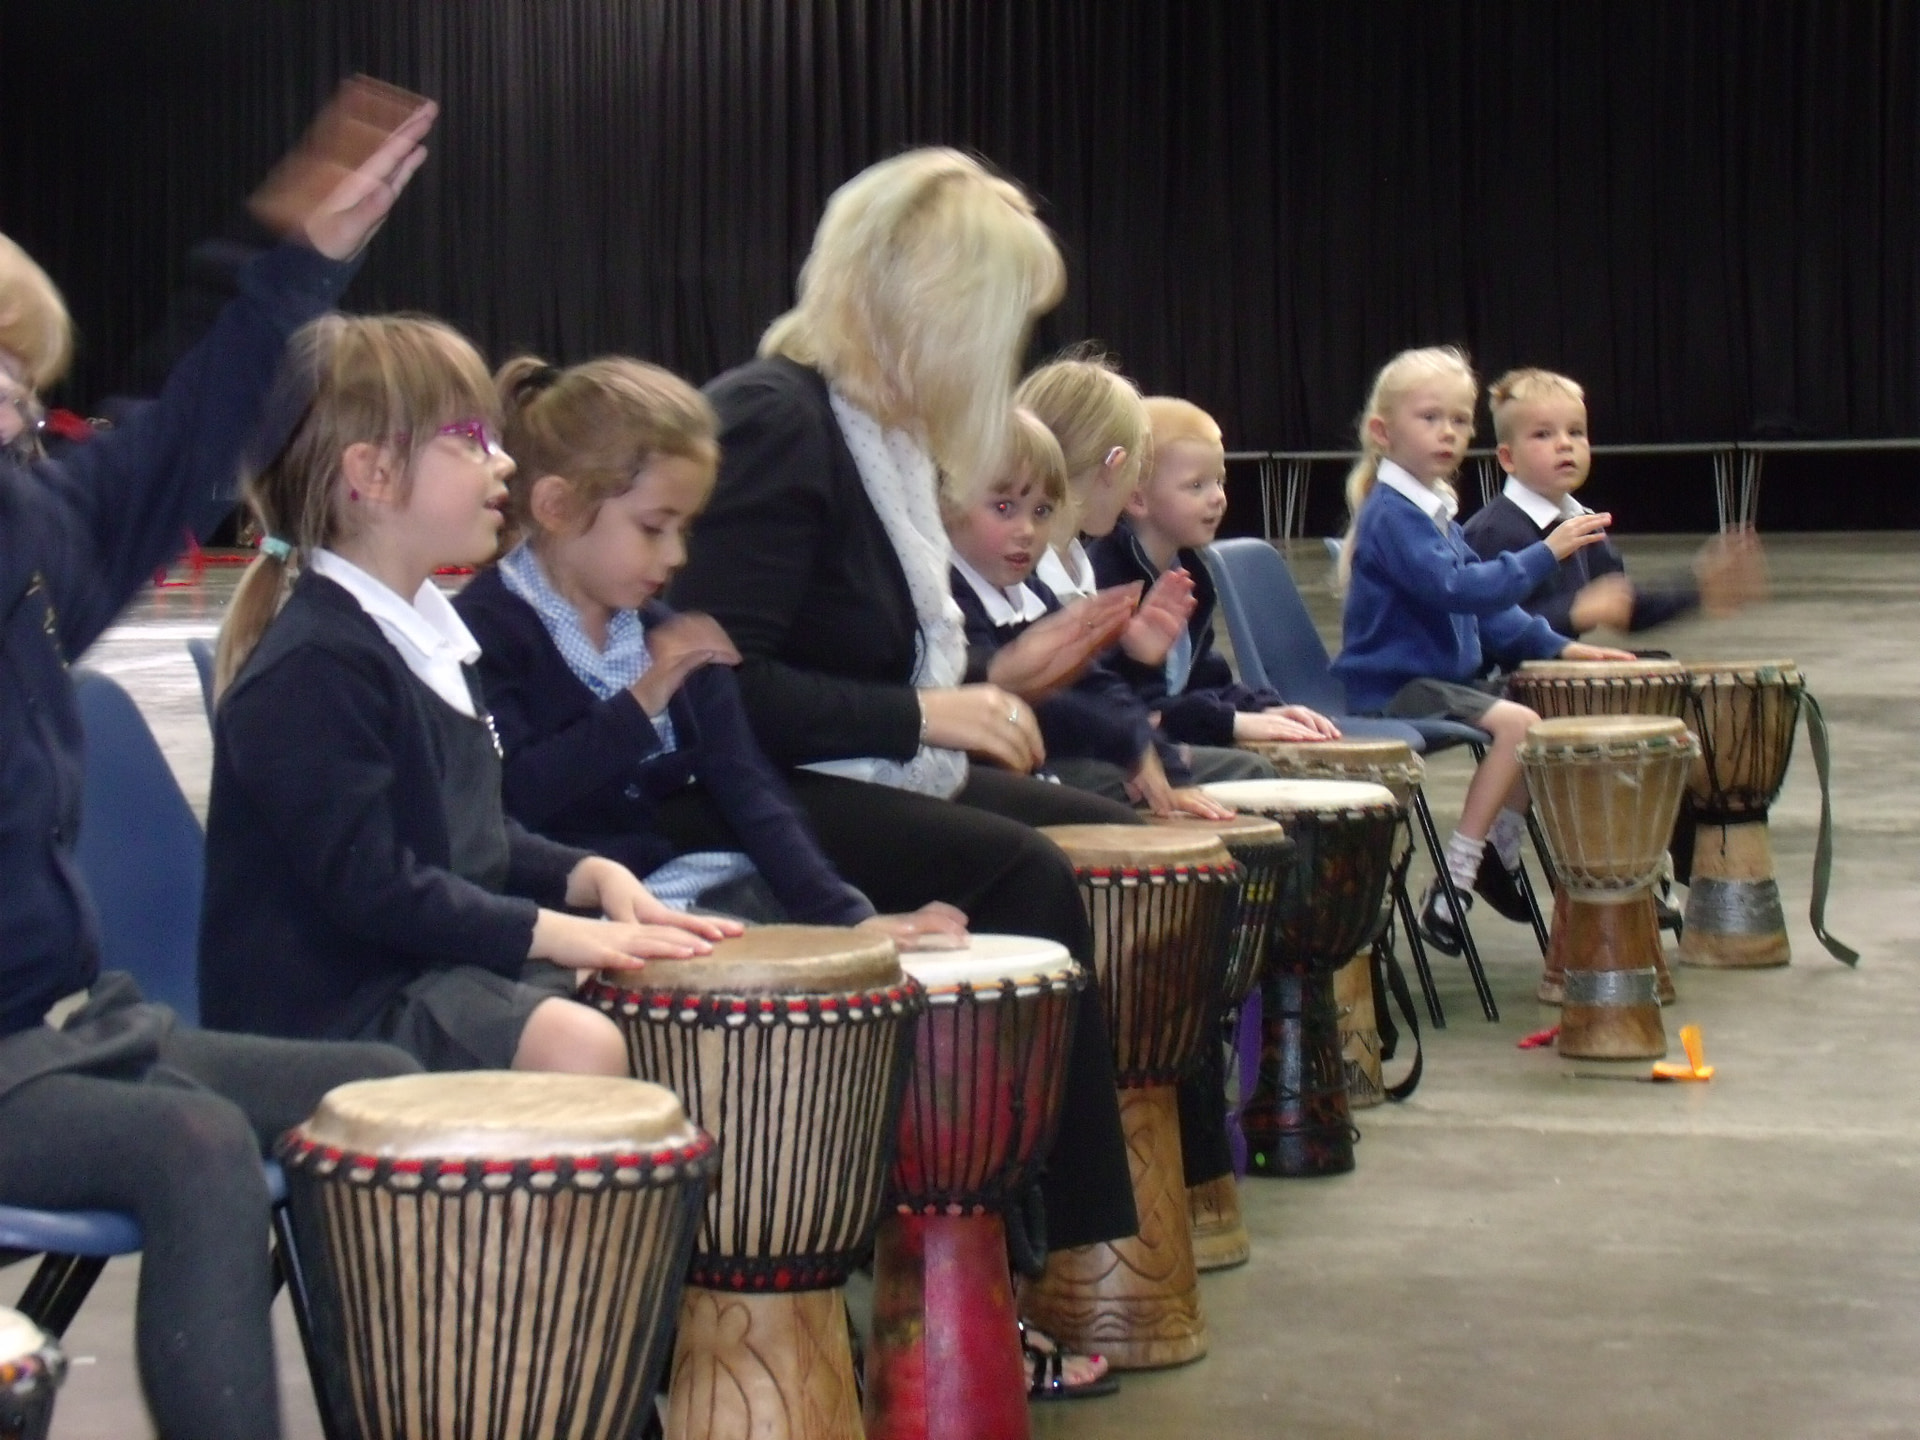 Children sat in line at school learning African drumming